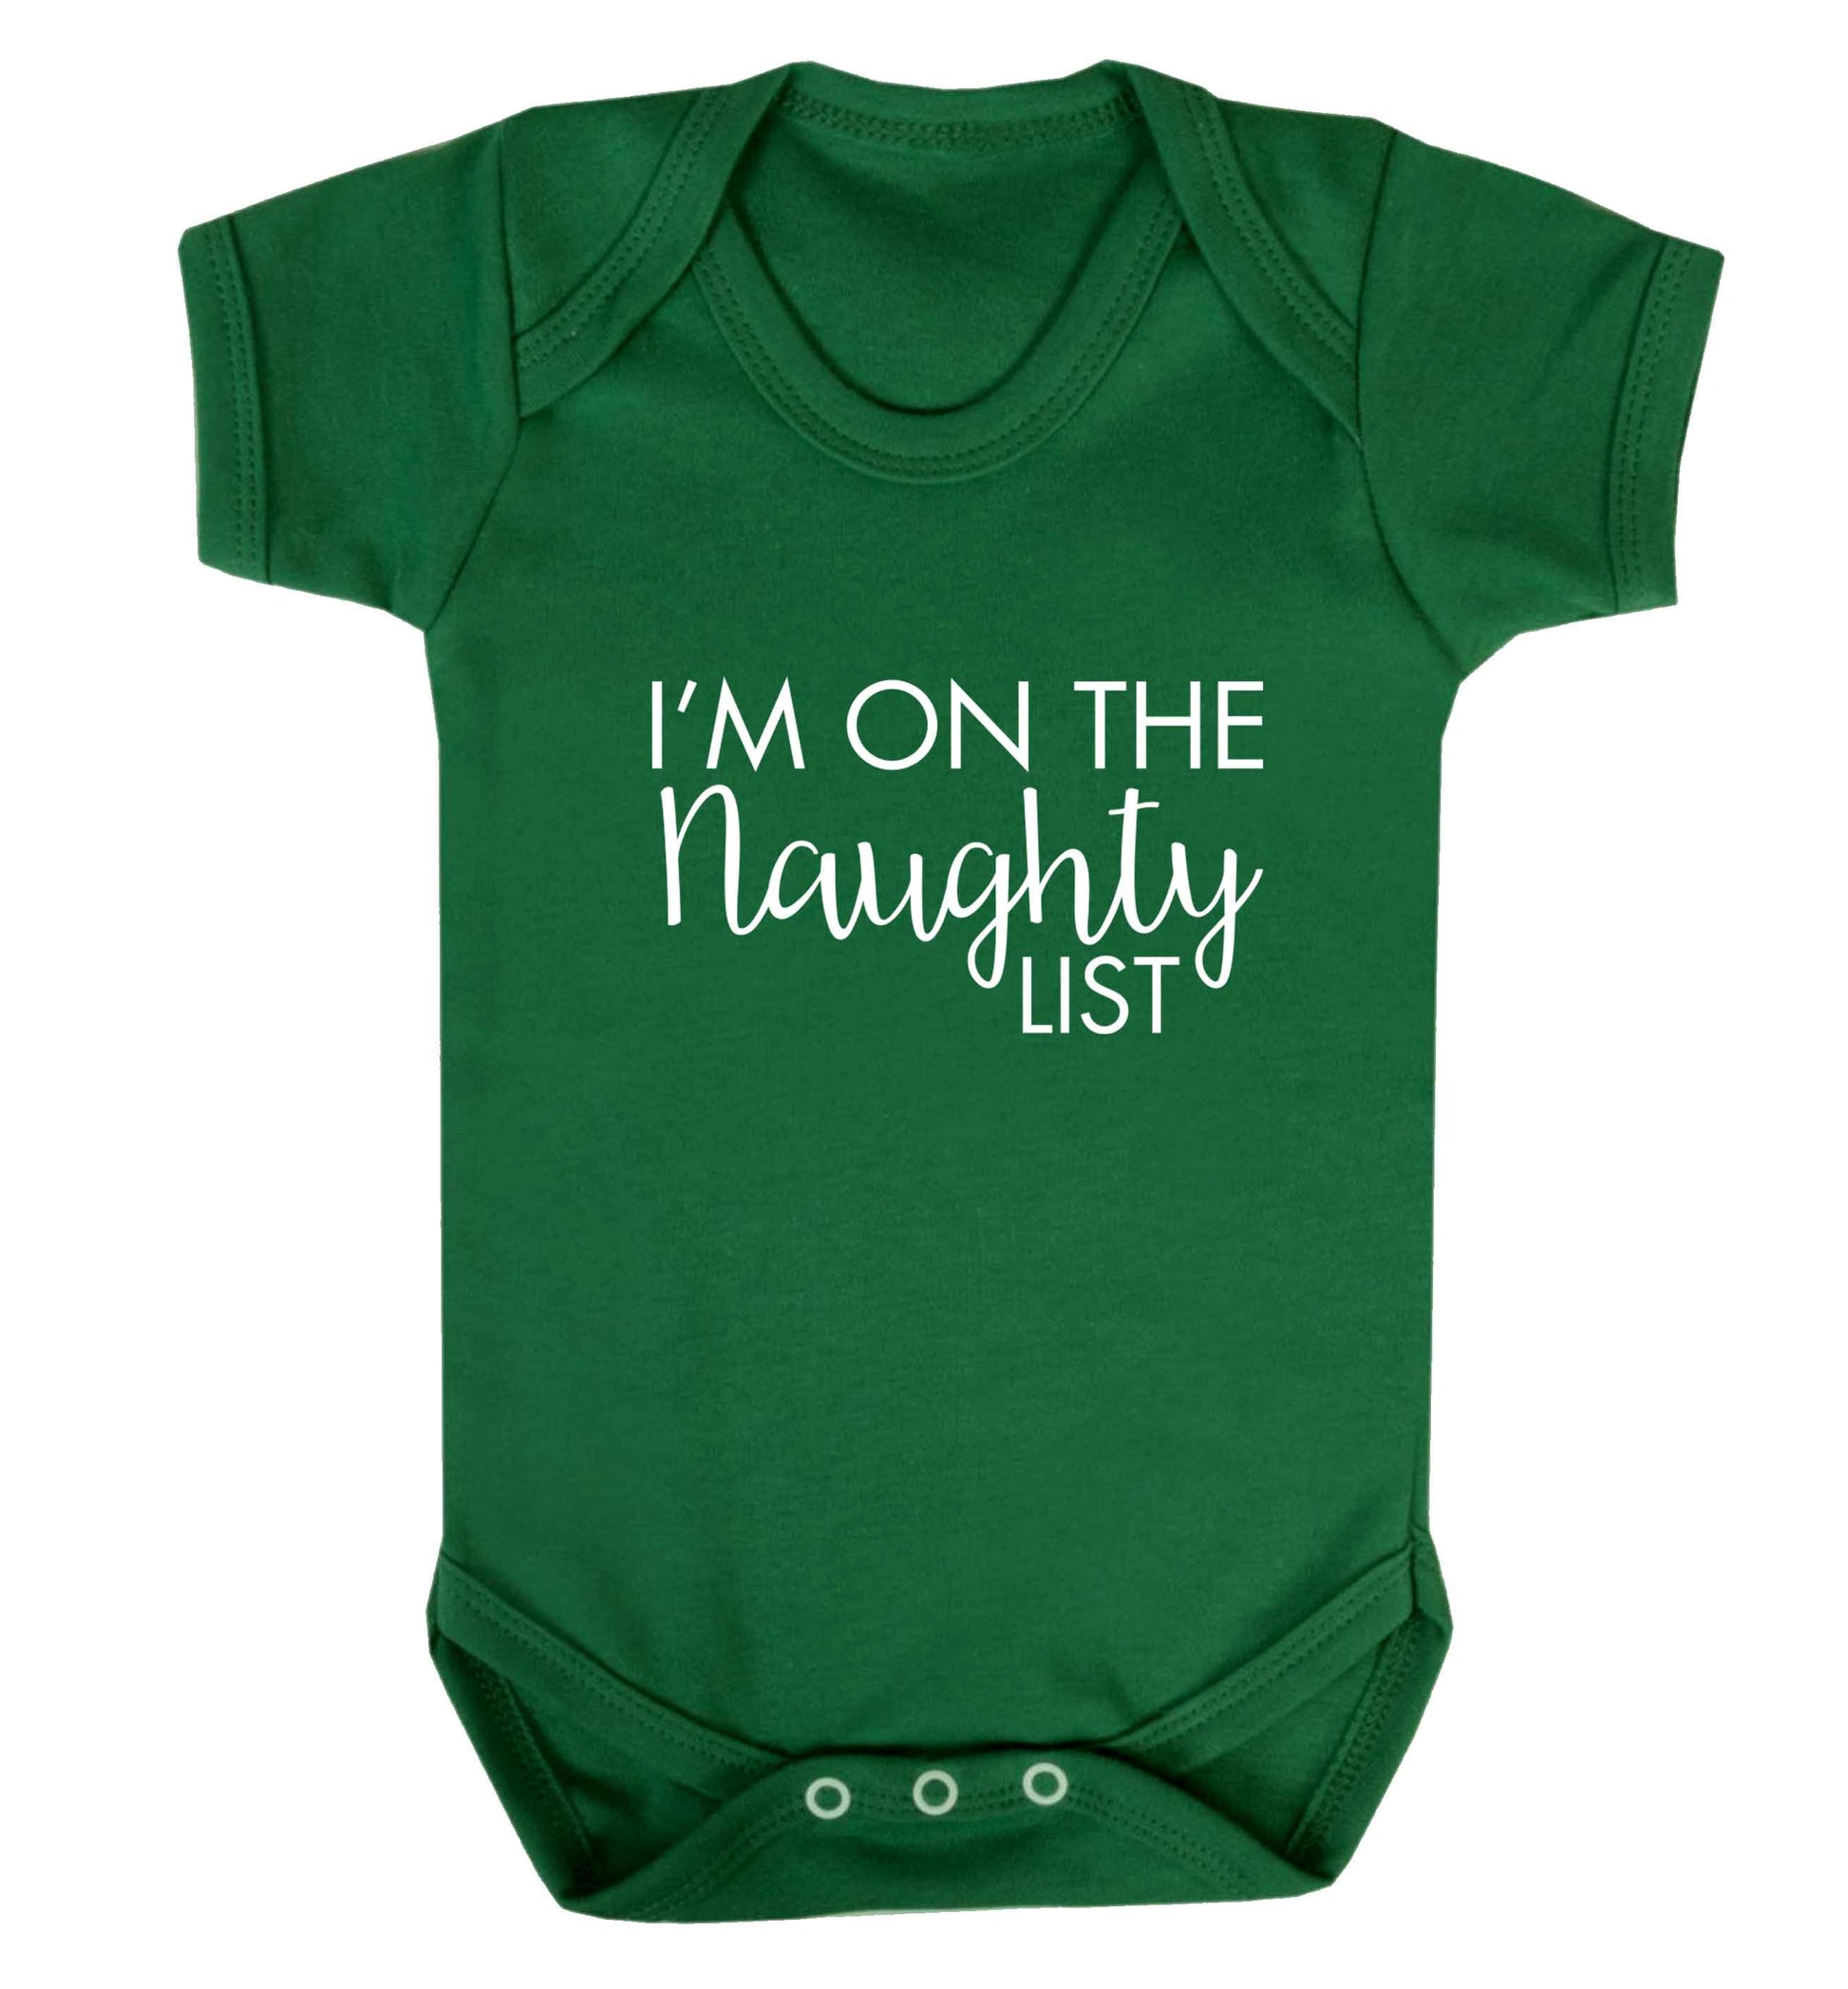 I'm on the naughty list baby vest green 18-24 months